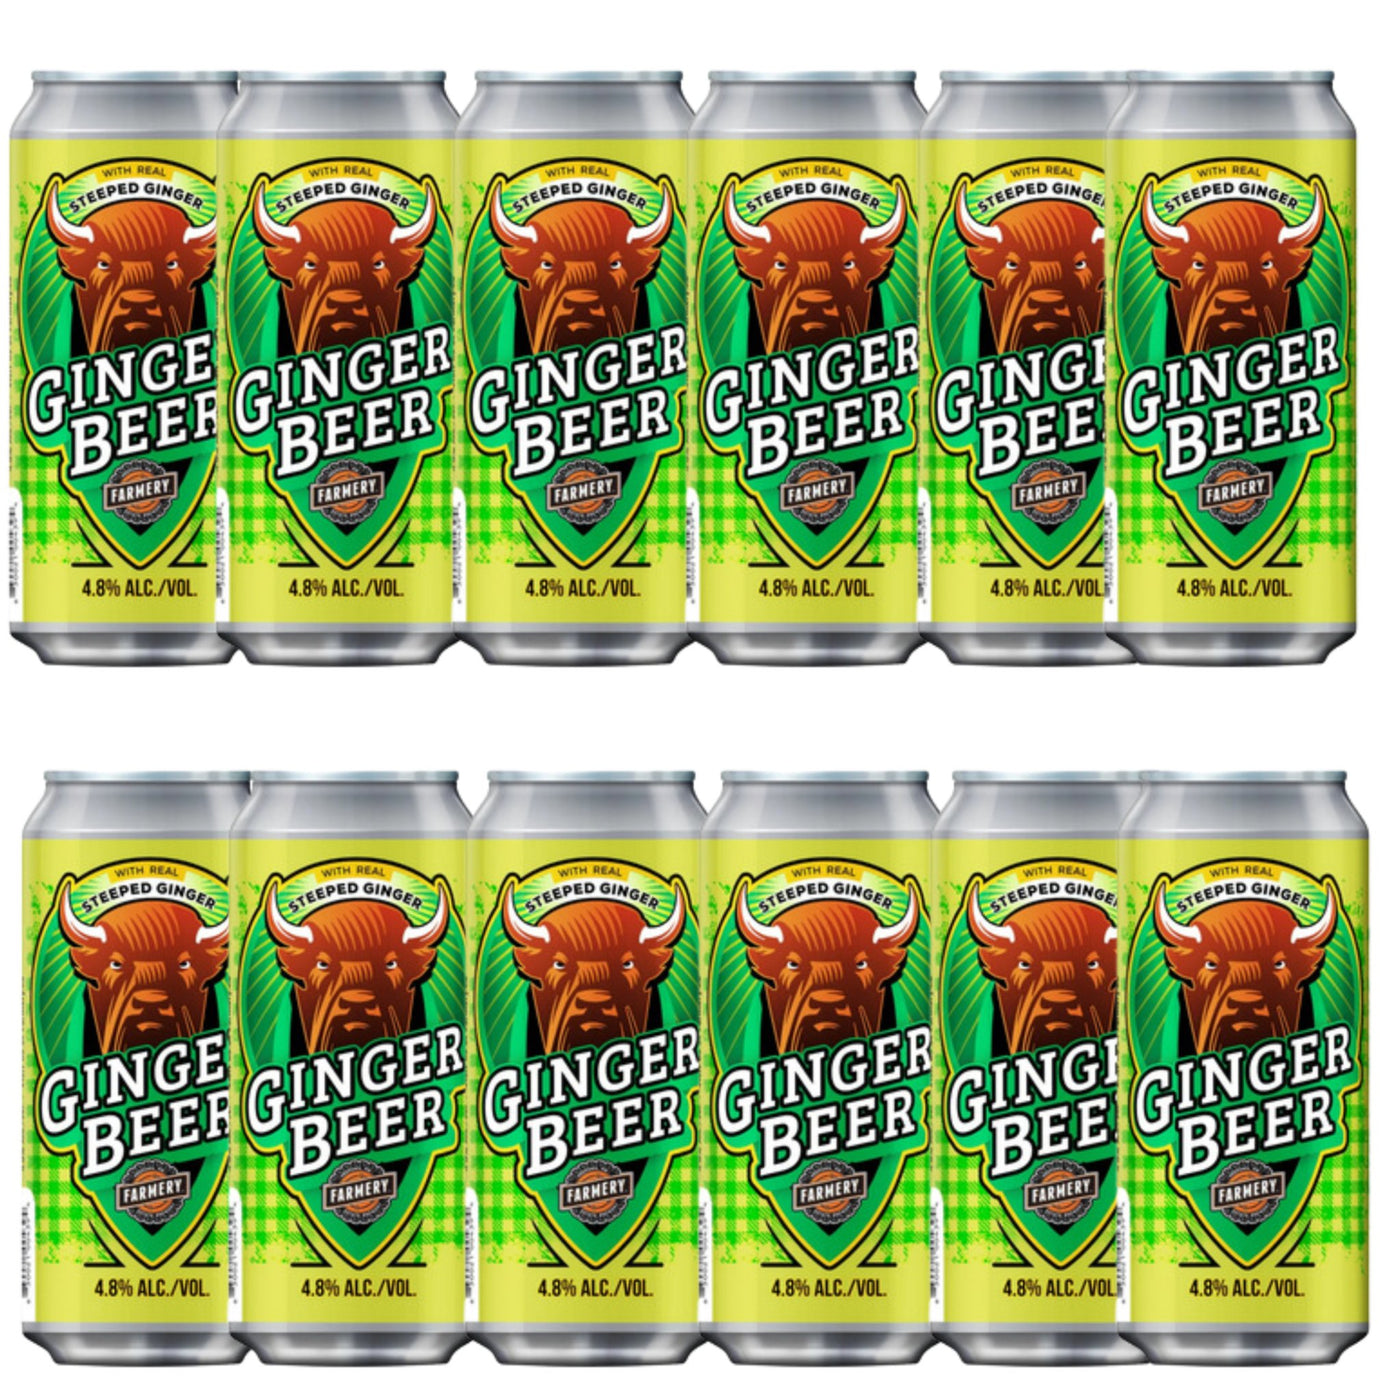 Ginger Beer - Farmery Estate Brewing Company Inc.-